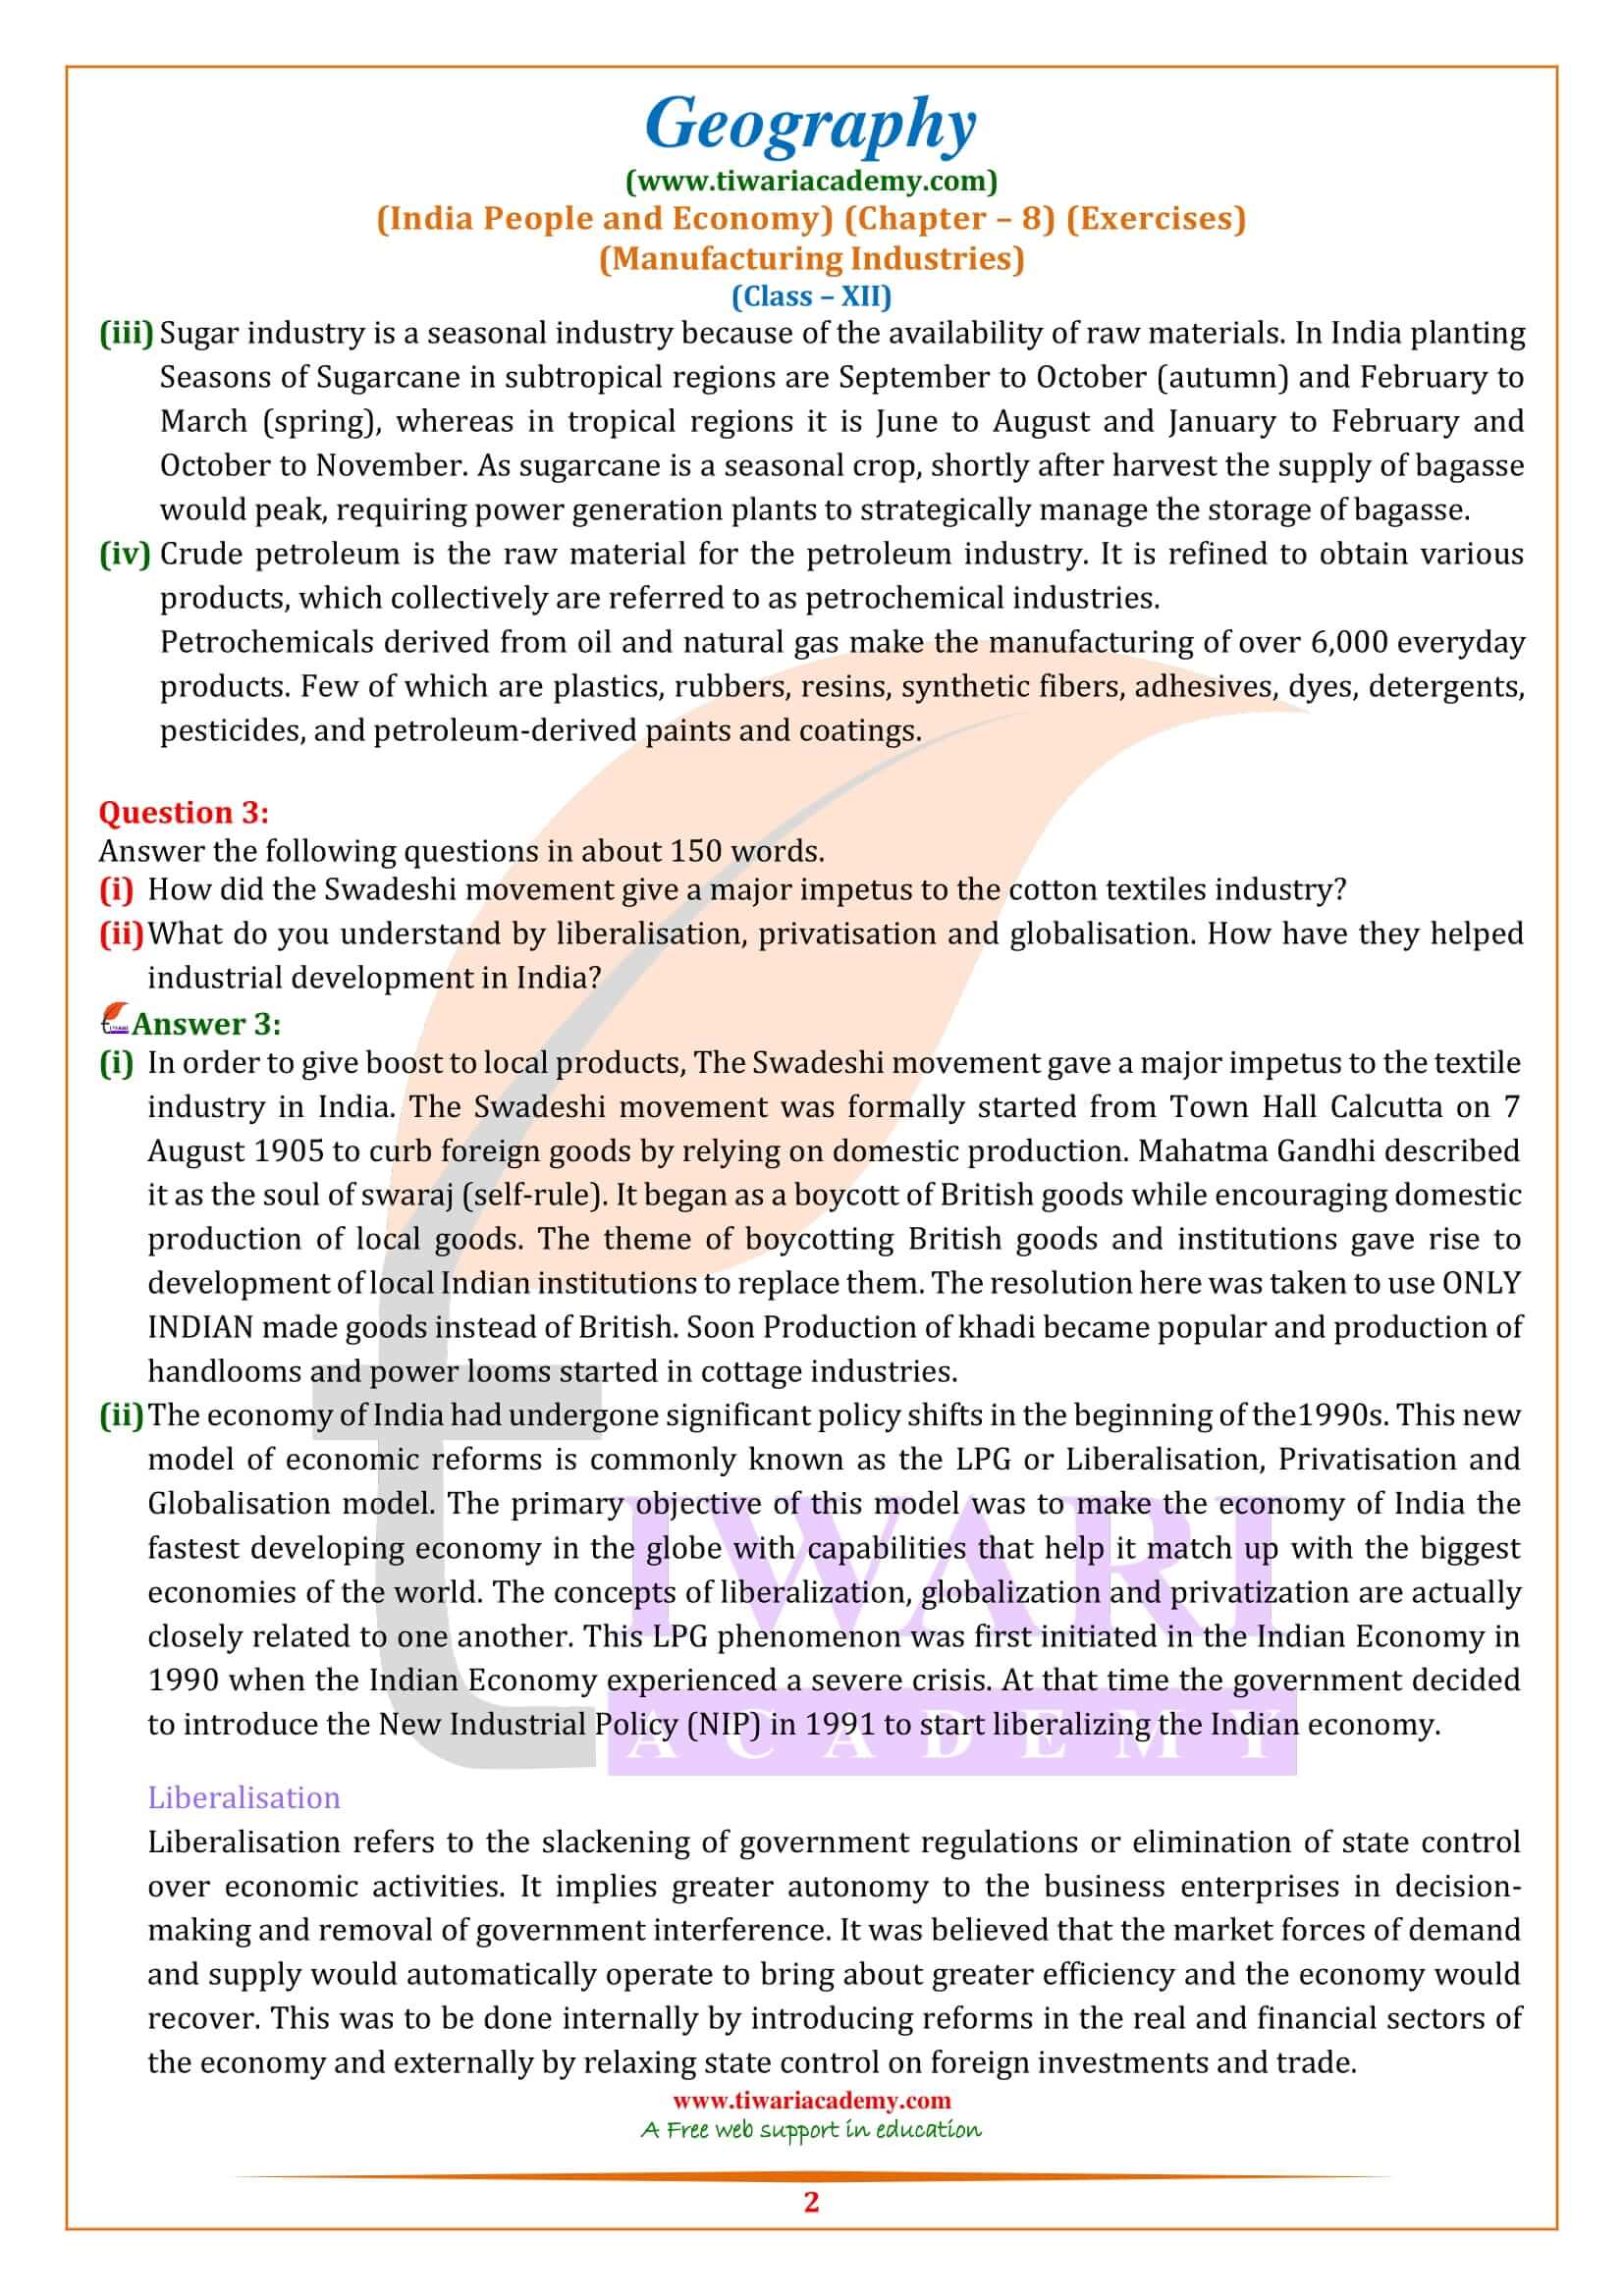 NCERT Solutions for Class 12 Geography Chapter 8 in English Medium